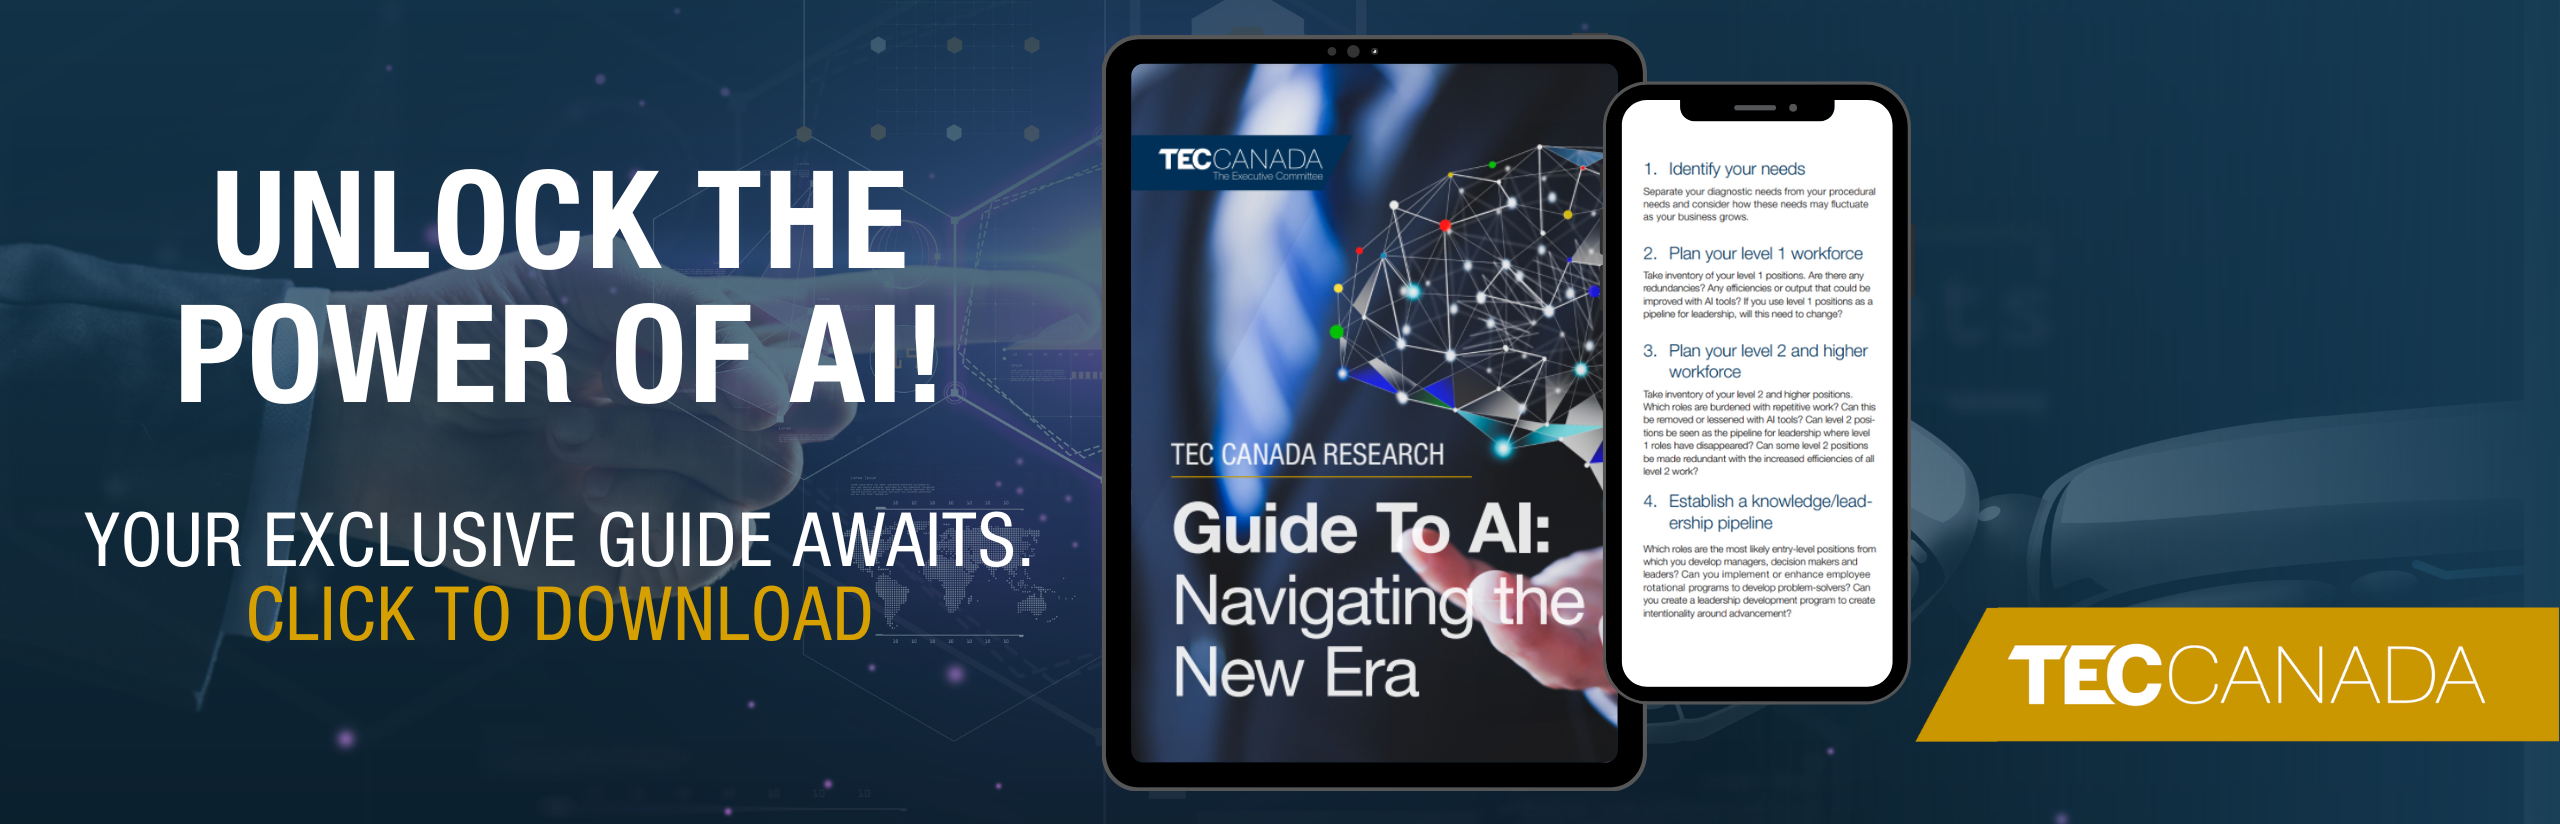 Select the image to access our Guide to AI eBook. Also accessible at this link: https://tec-canada.com/insights/guide-to-ai-navigating-the-new-era/